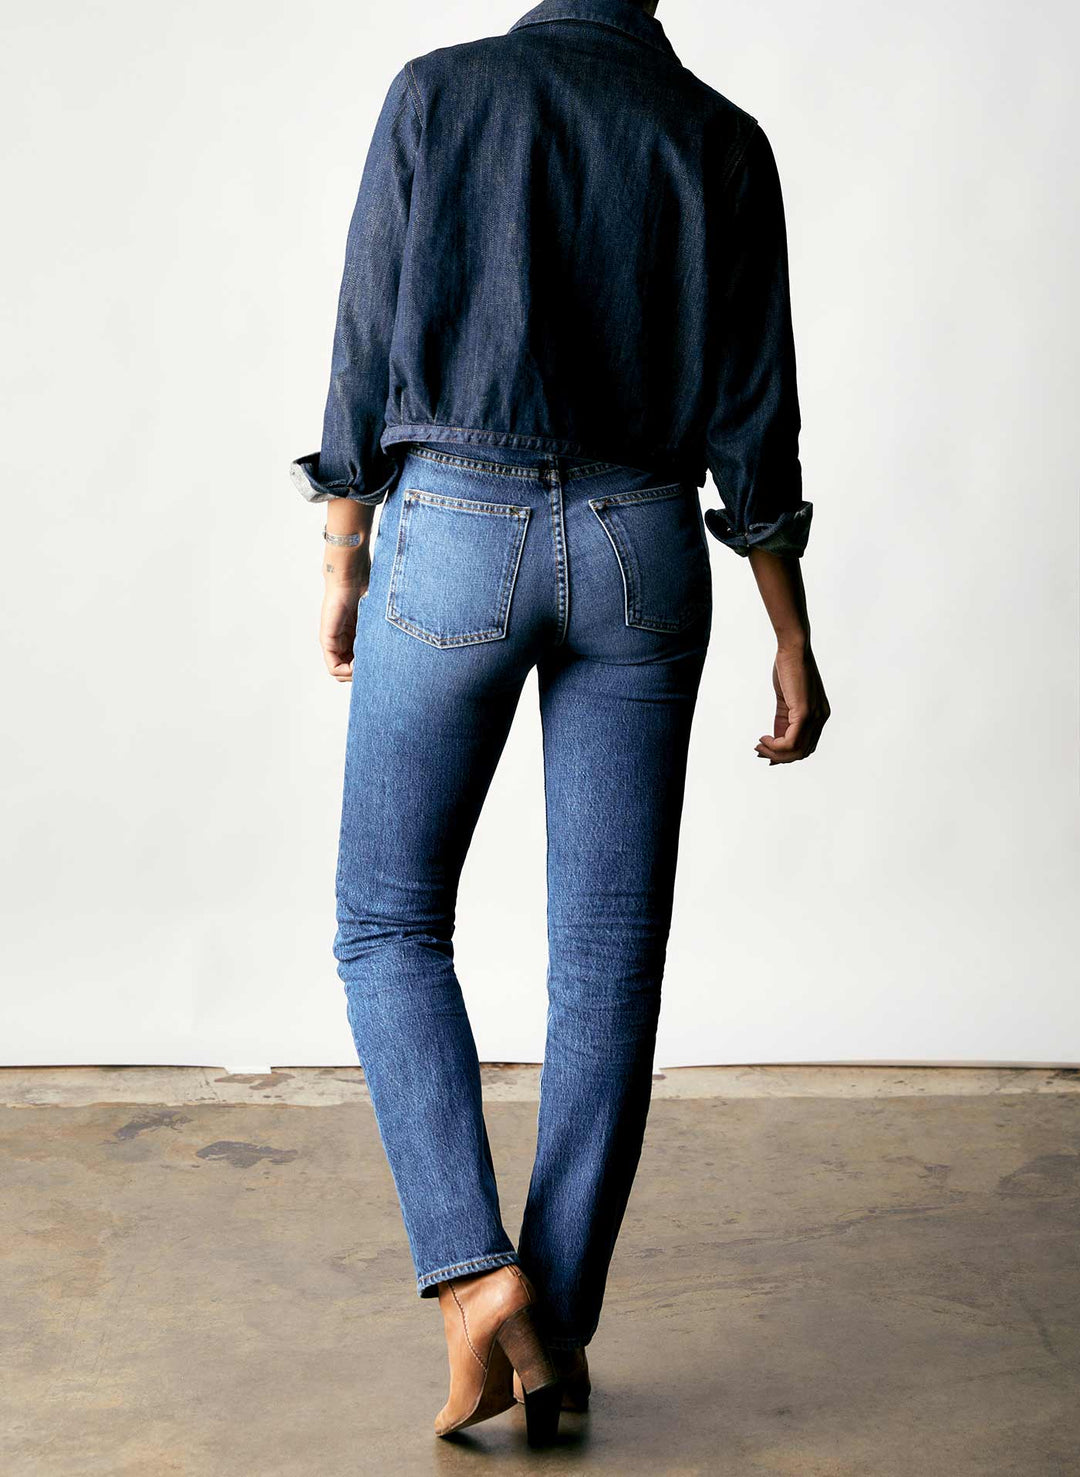 a woman wearing jeans and a blue shirt